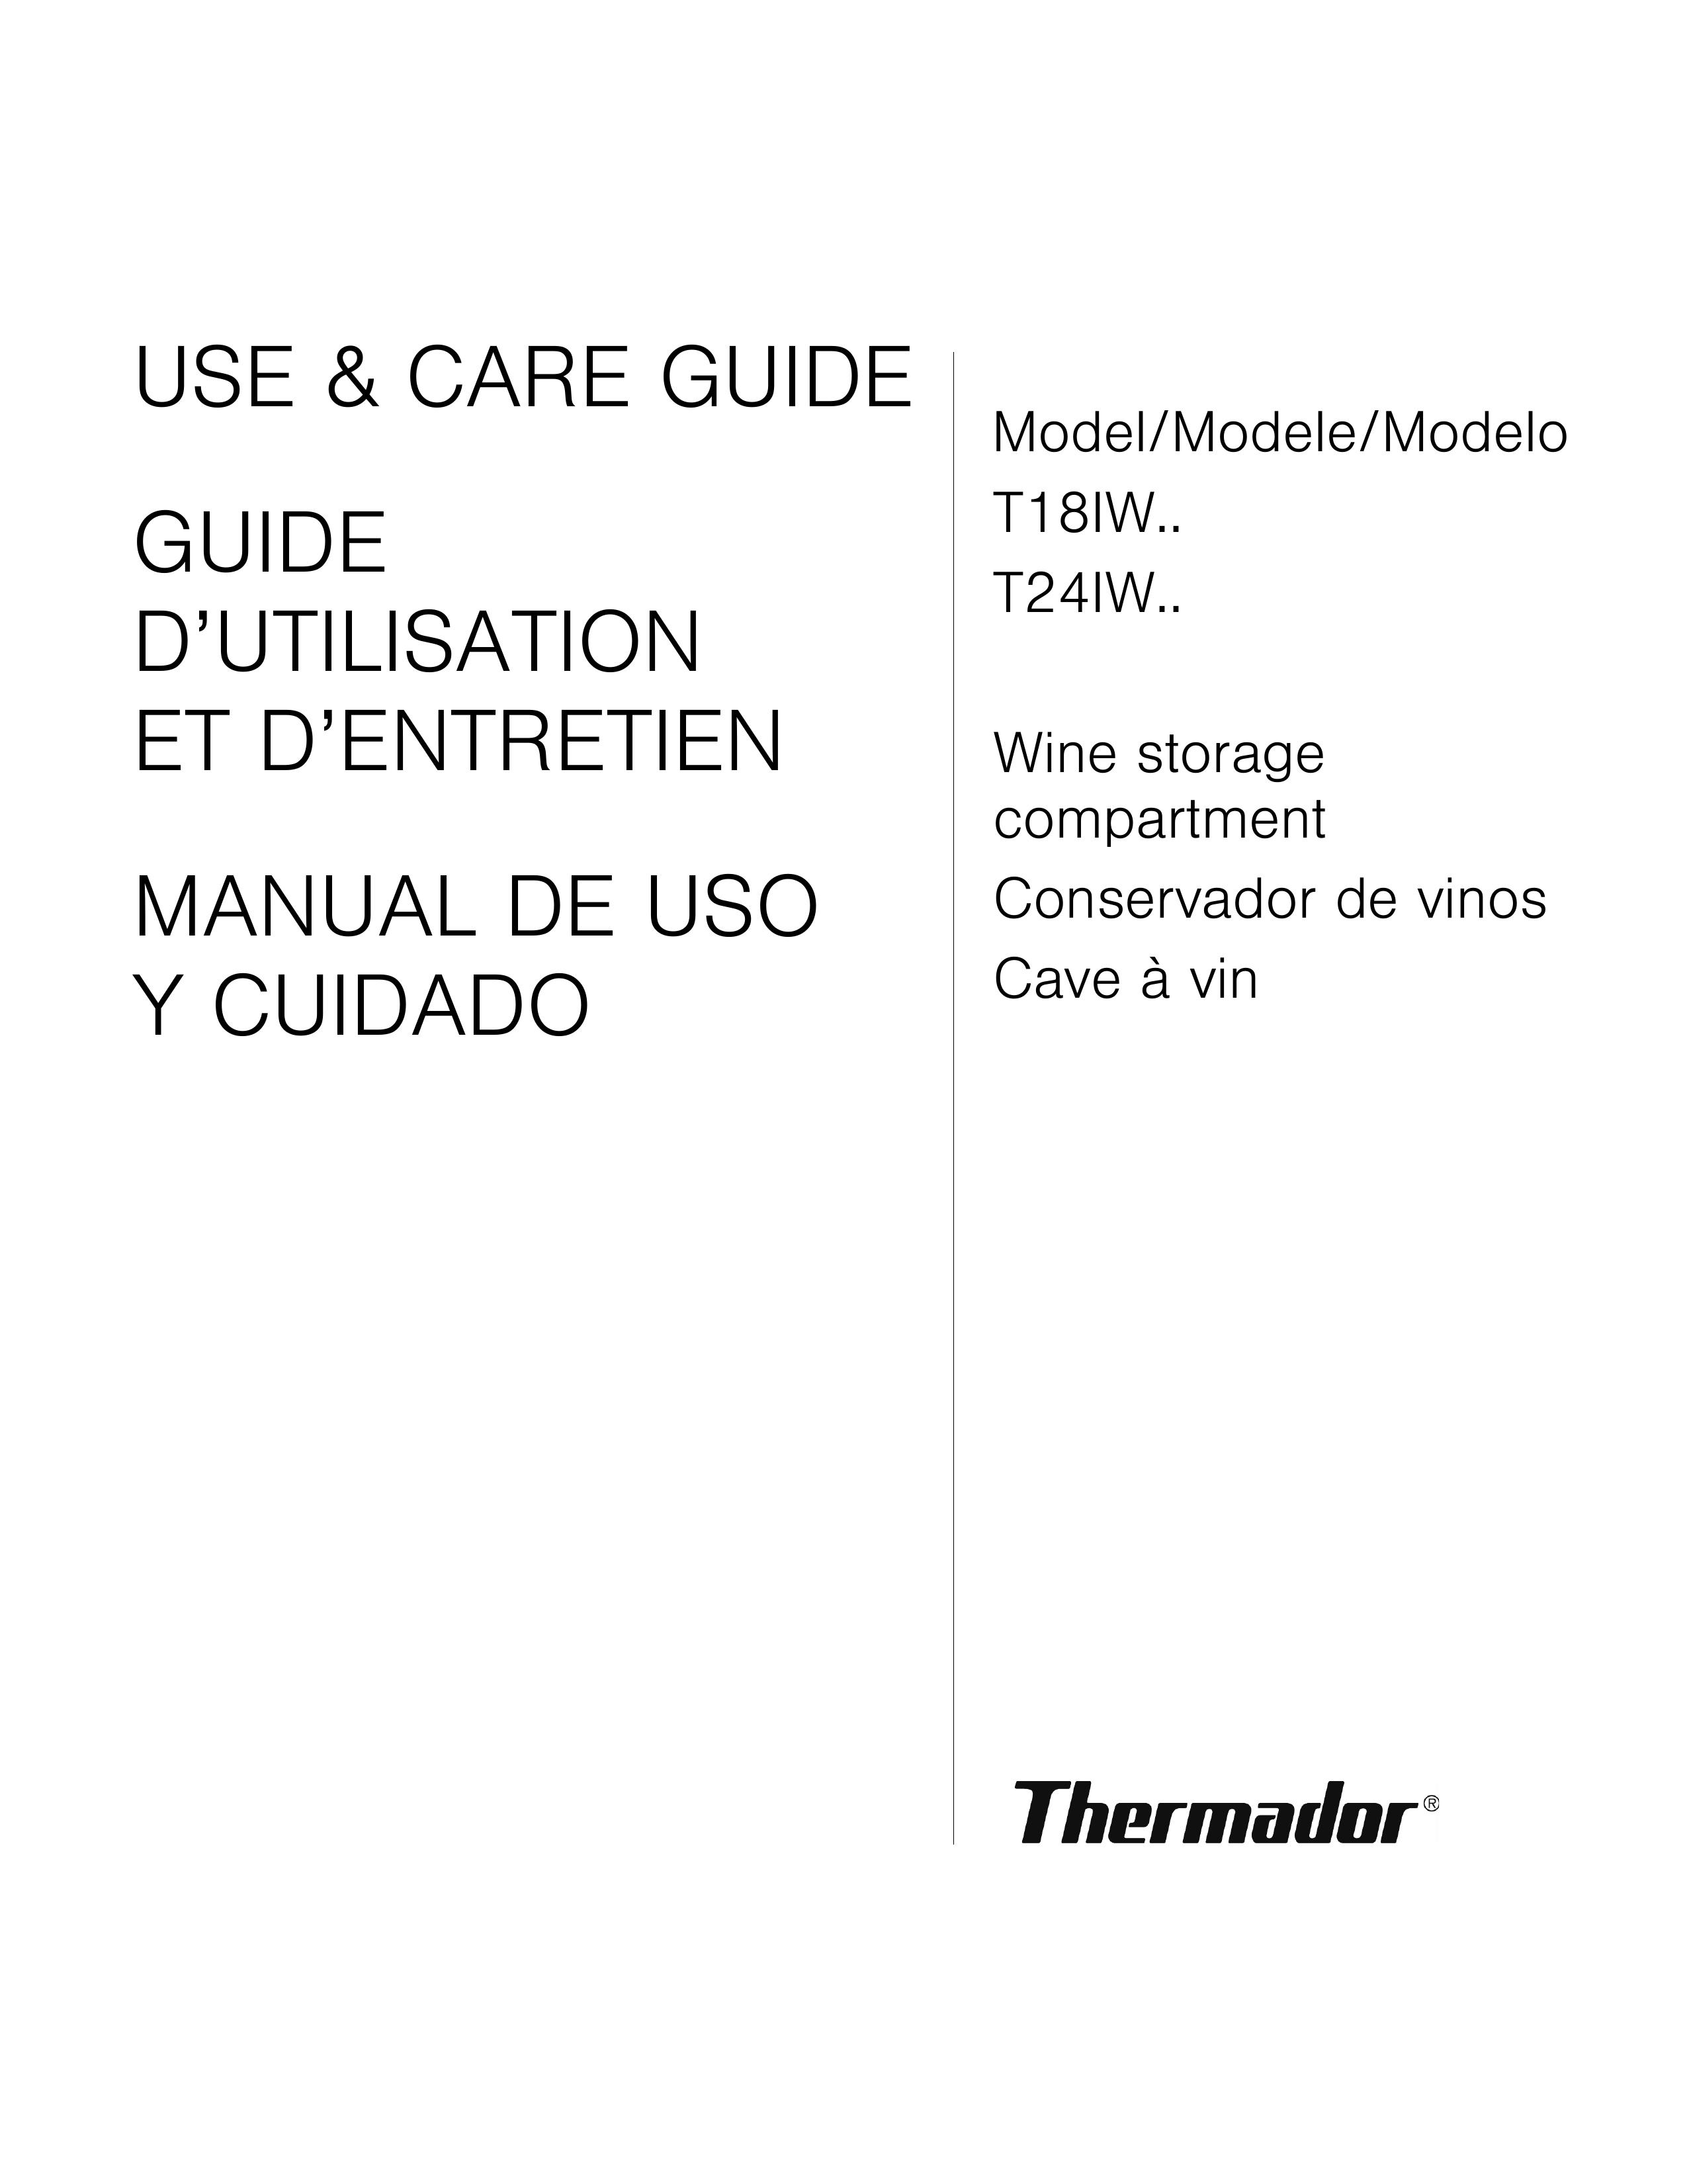 Thermador T24IW Refrigerator User Manual